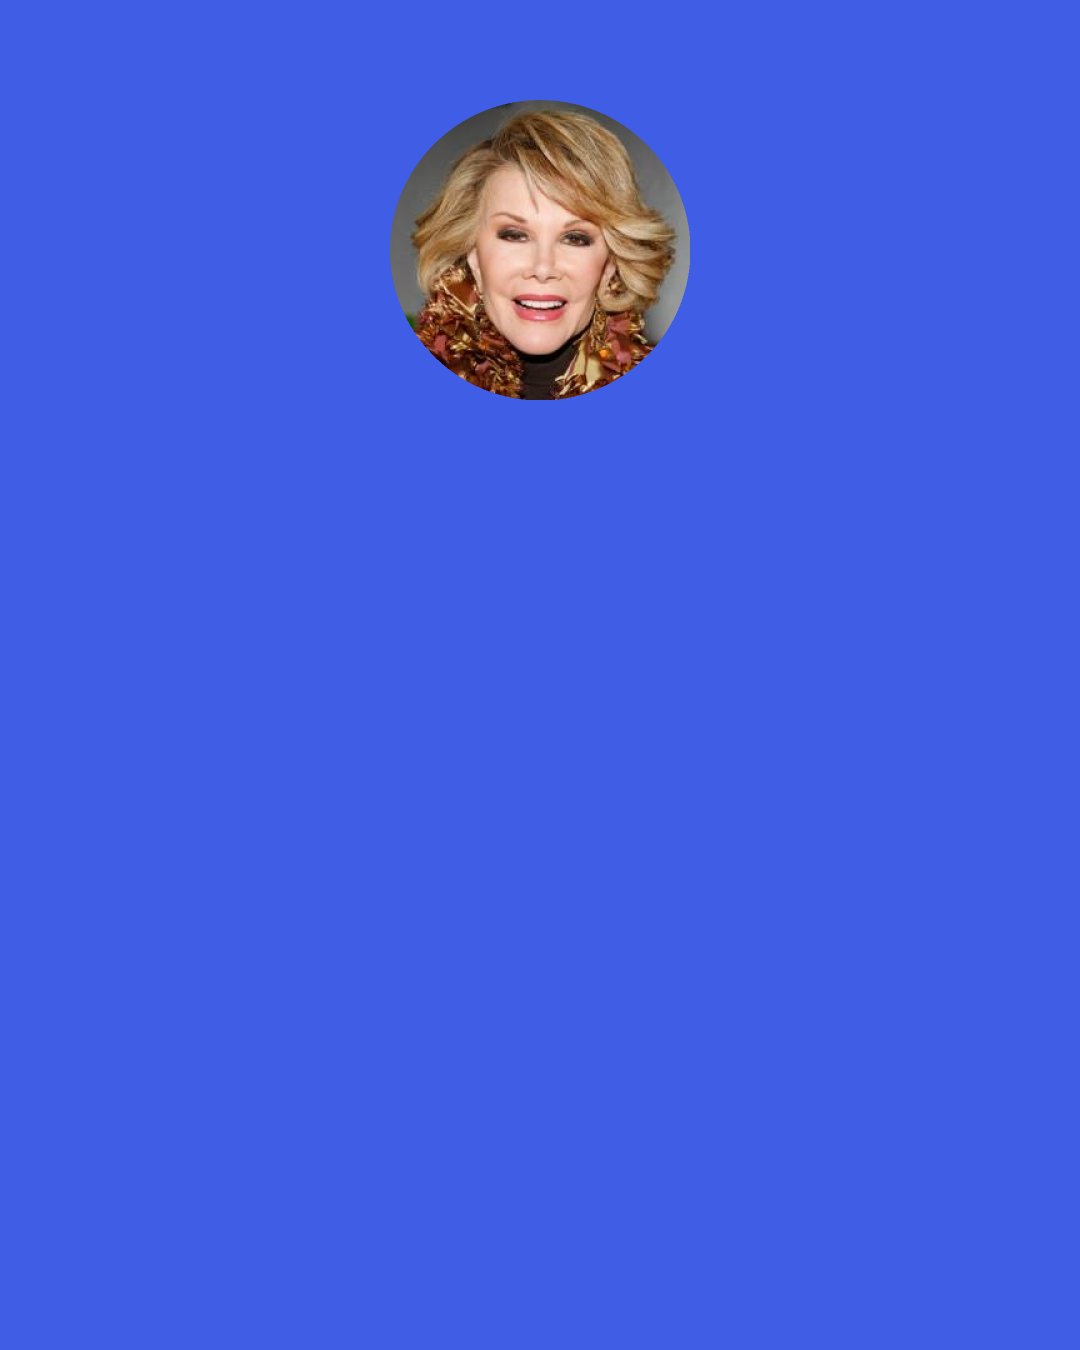 Joan Rivers: "I've learned what's funny verbally ain't so funny on e-mail: They don't hear your intonations. Melissa broke up with somebody over that. She tried to tell him: "That was a joke!" But he just didn't get it. Mick Jagger said, "F- 'em if they don't get the joke." And I love him. That comes with age: Knowing it's their problem, not mine."